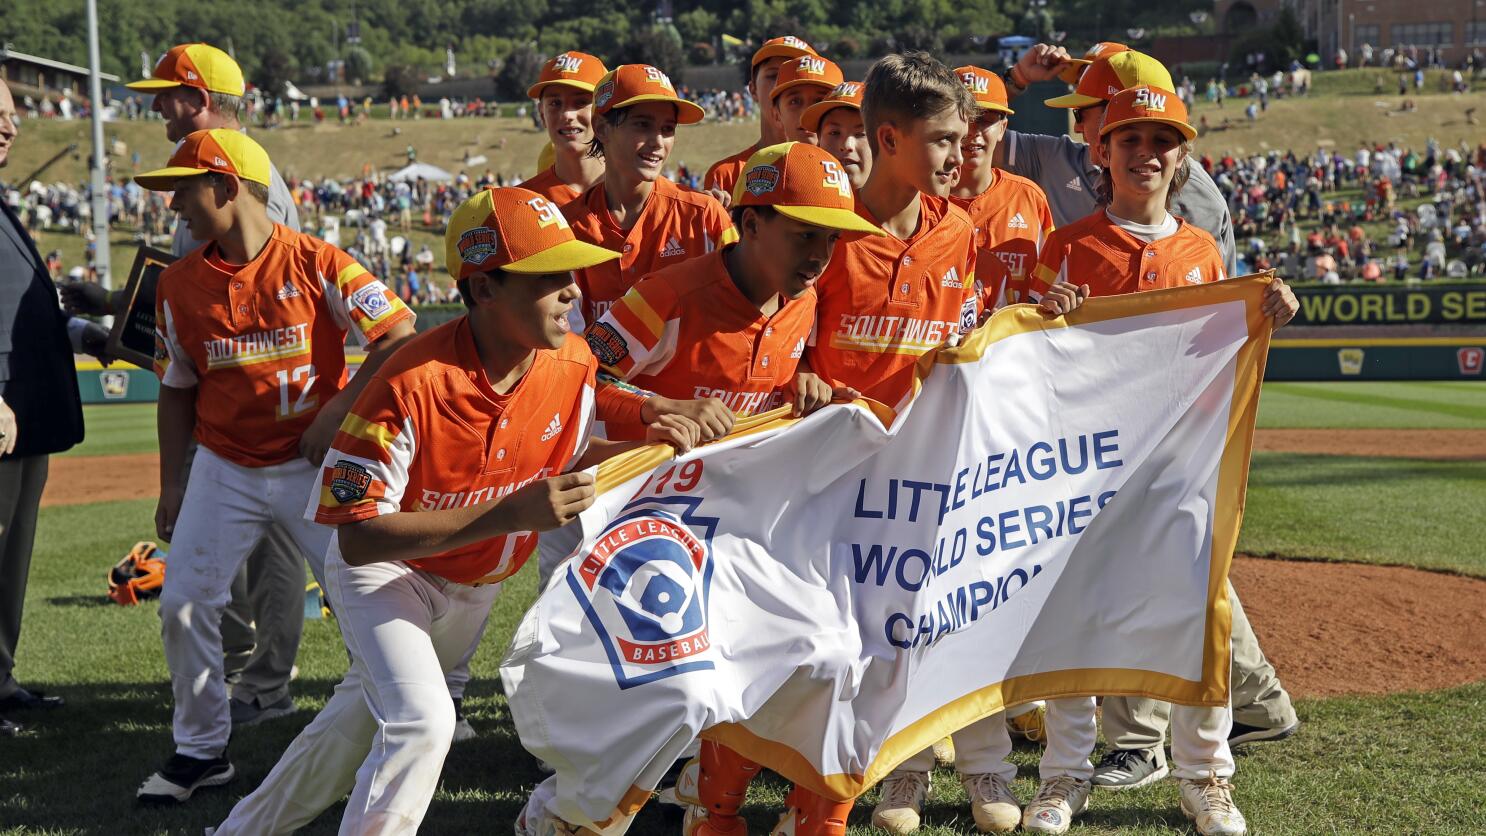 Who won the Little League World Series in 2019? Louisiana at the